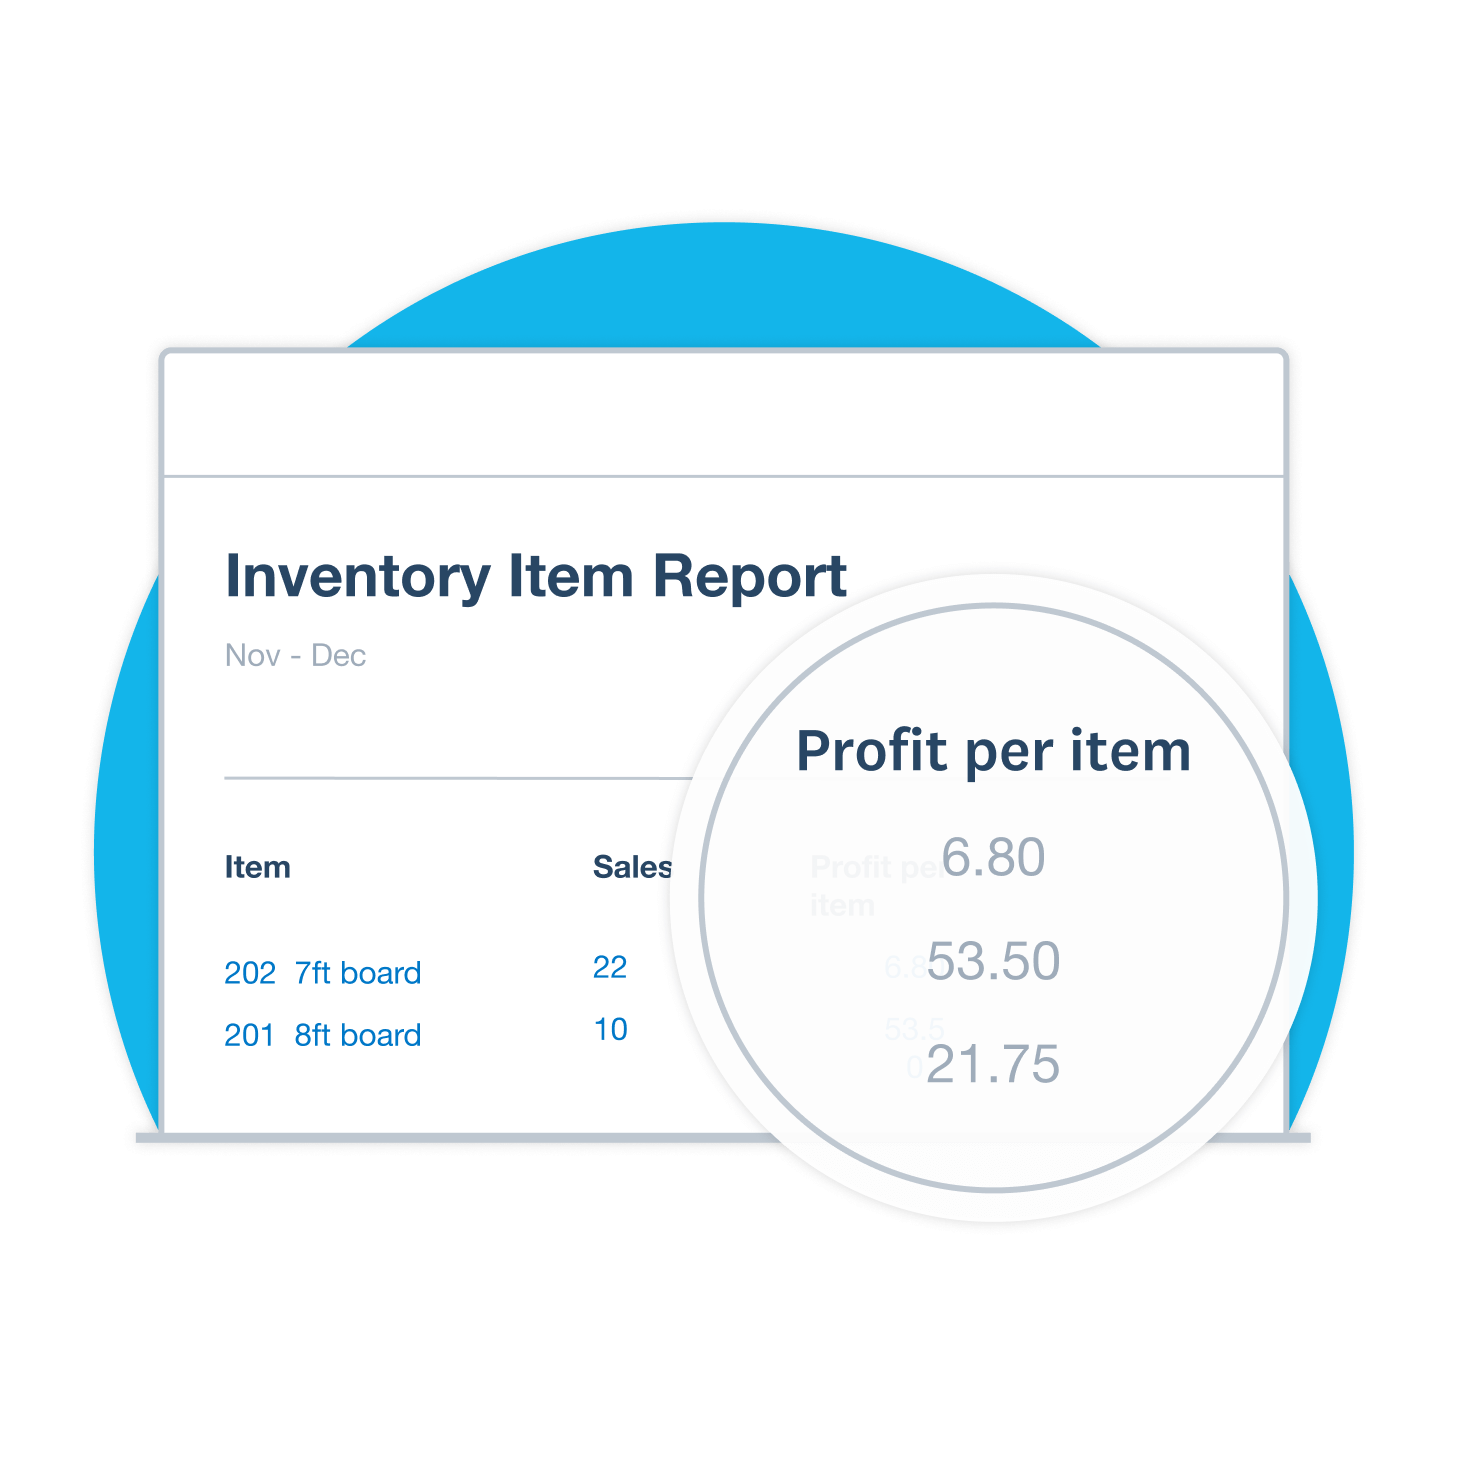 Xero accounting software shows an inventory item report listing profit per item.